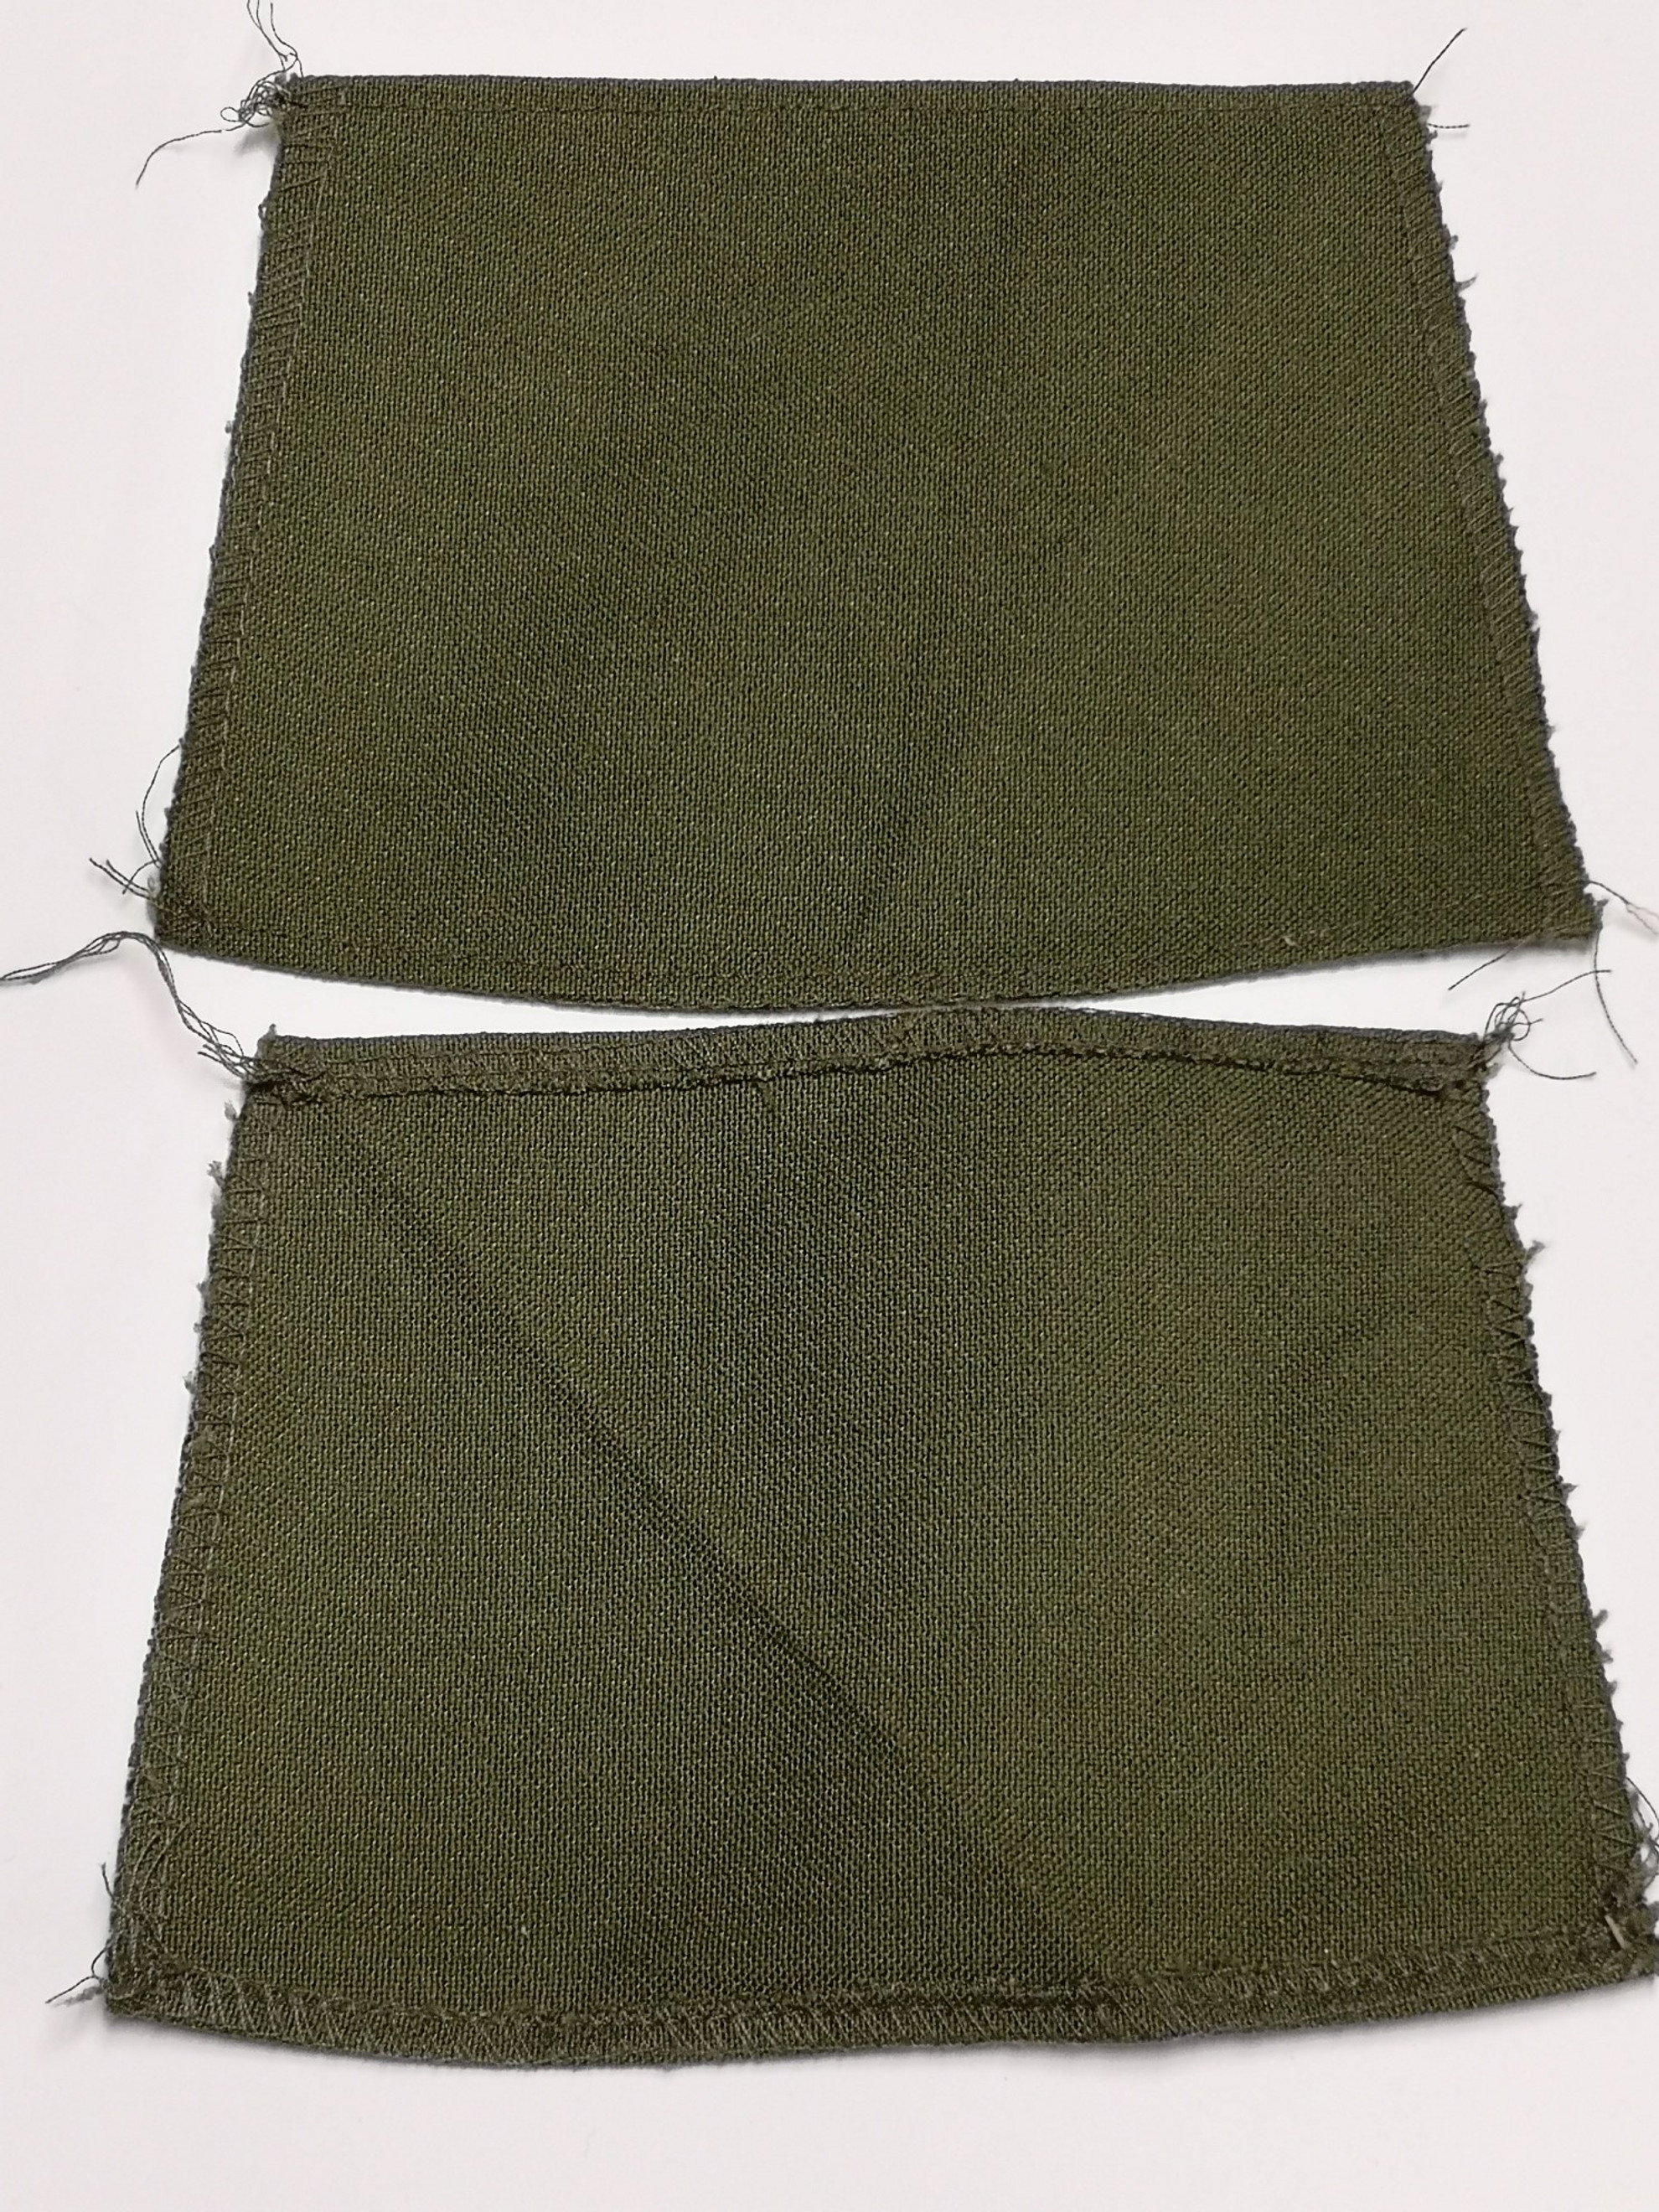 Canadian Armed Forces Green Rank Epaulets Unsewn - Blank